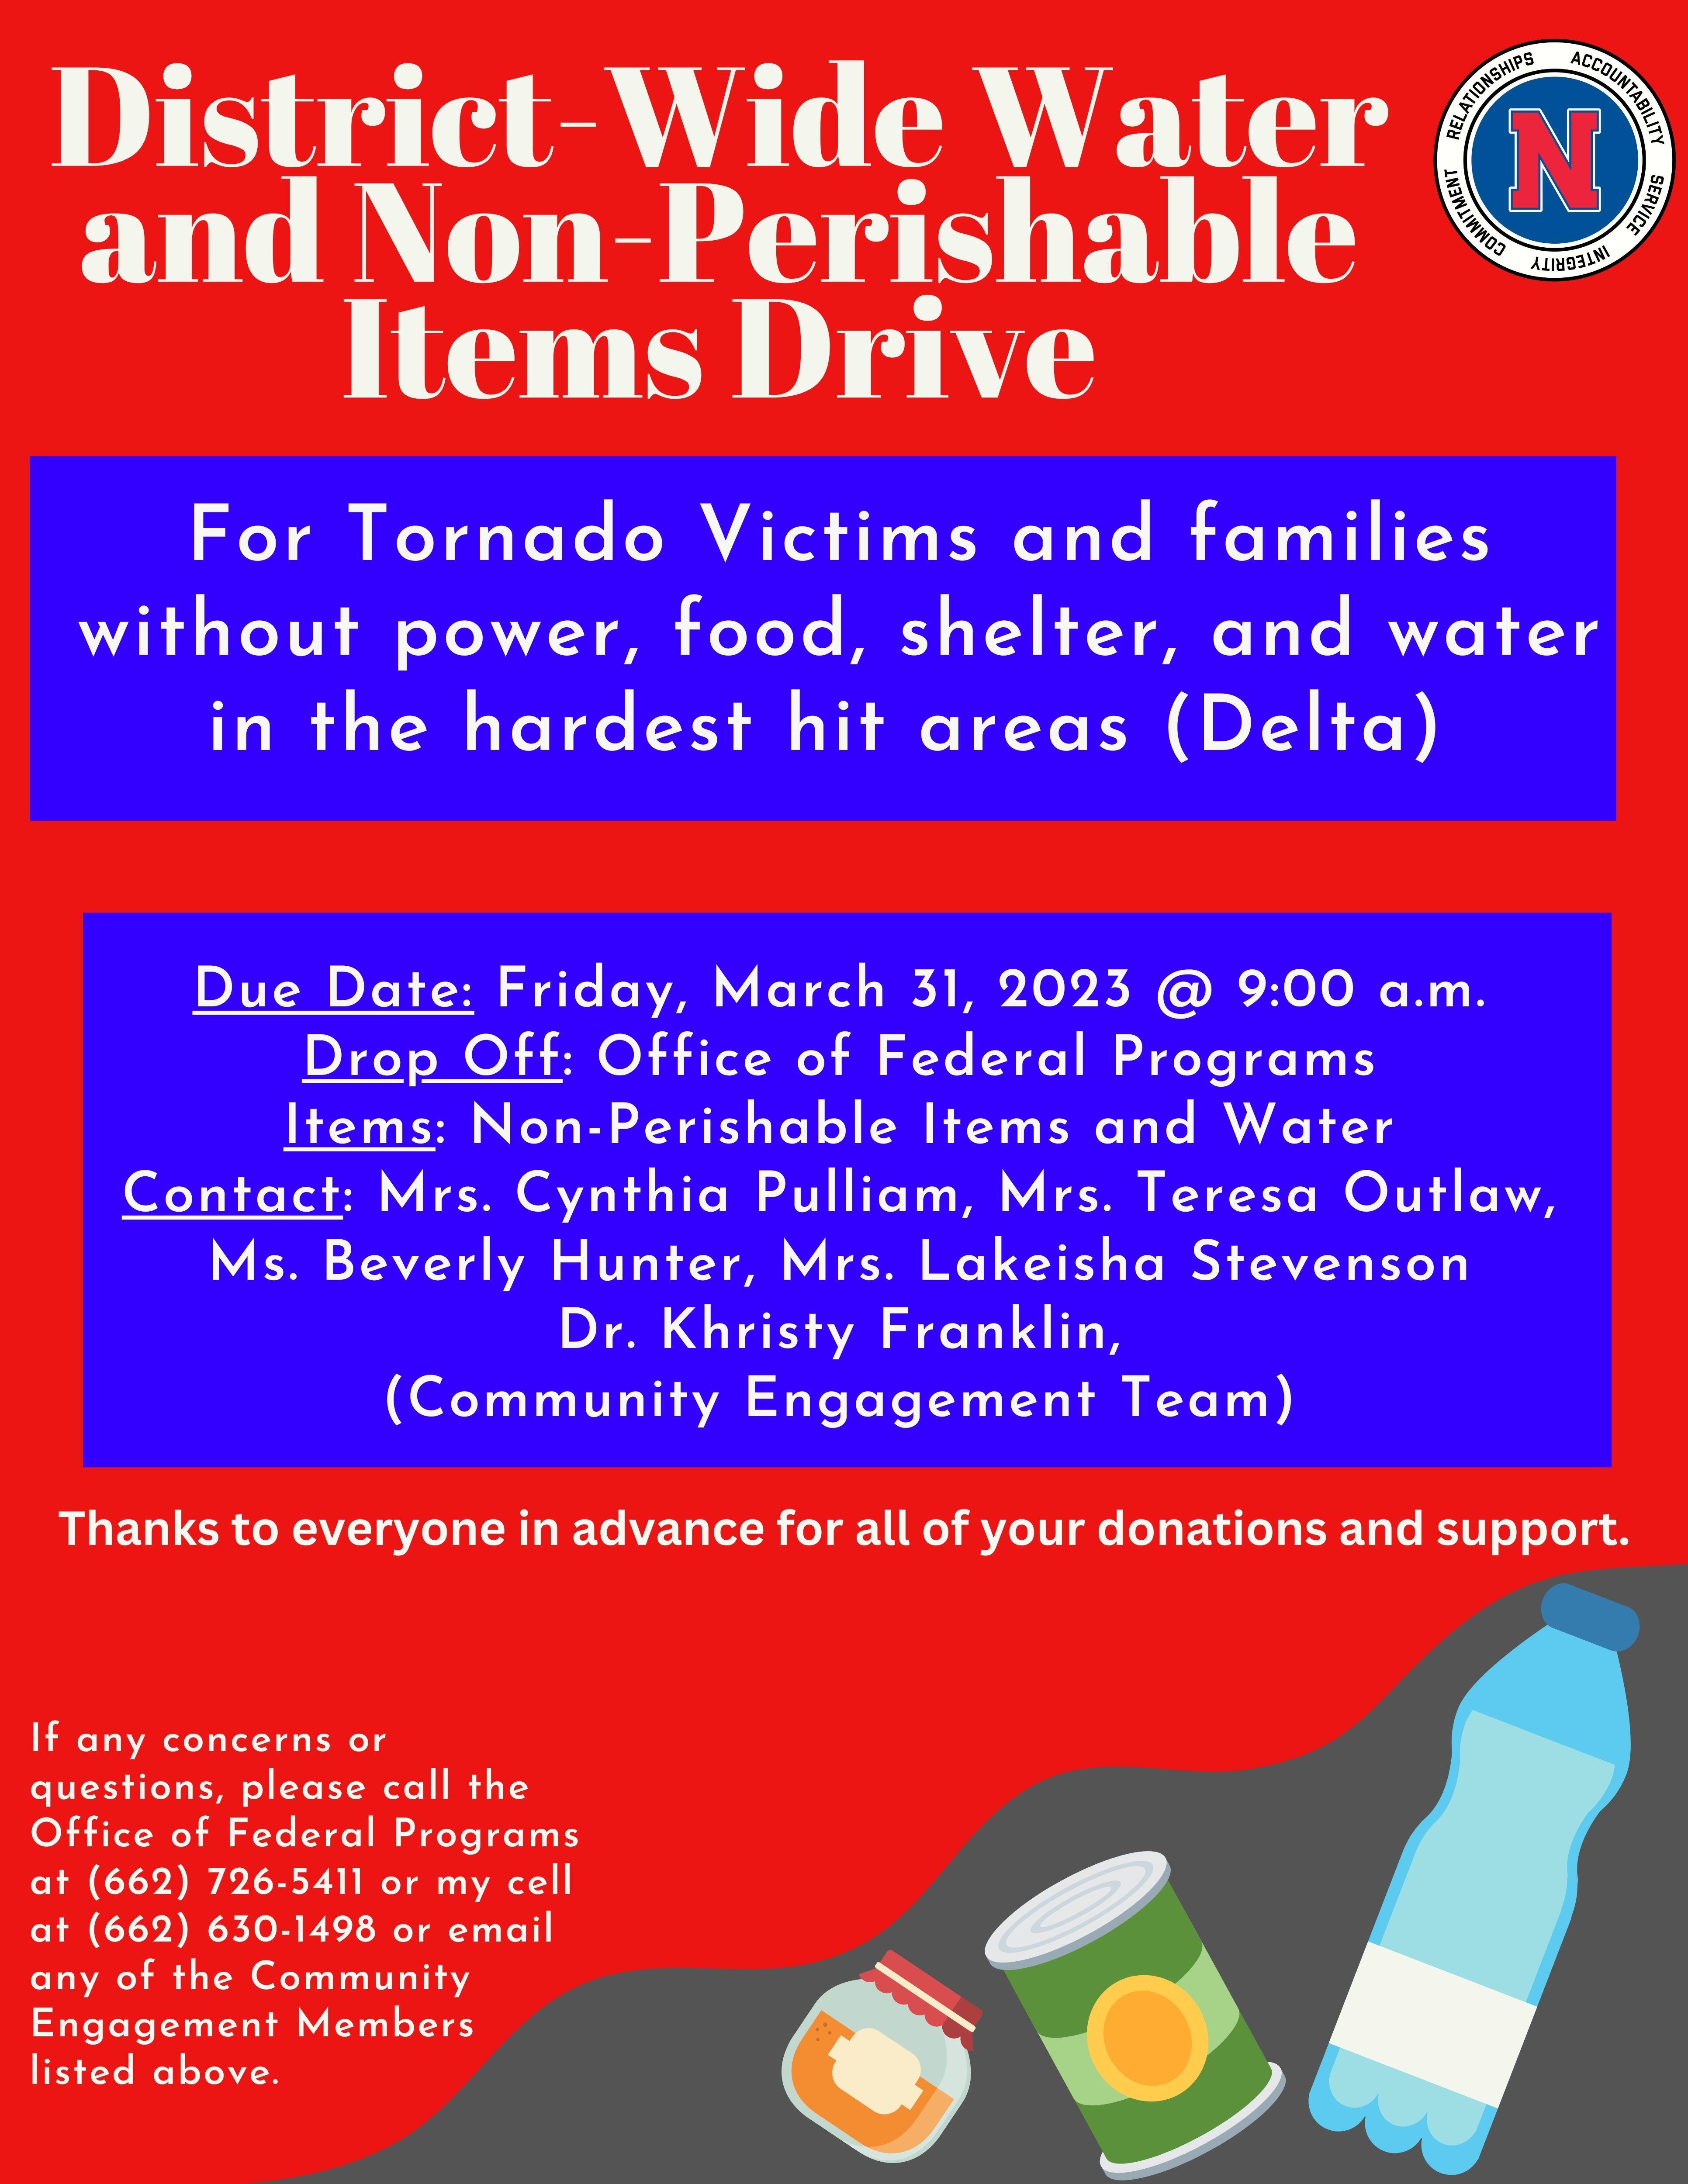 District-Wide Water and Non-Perishable Items Drive flyer 2